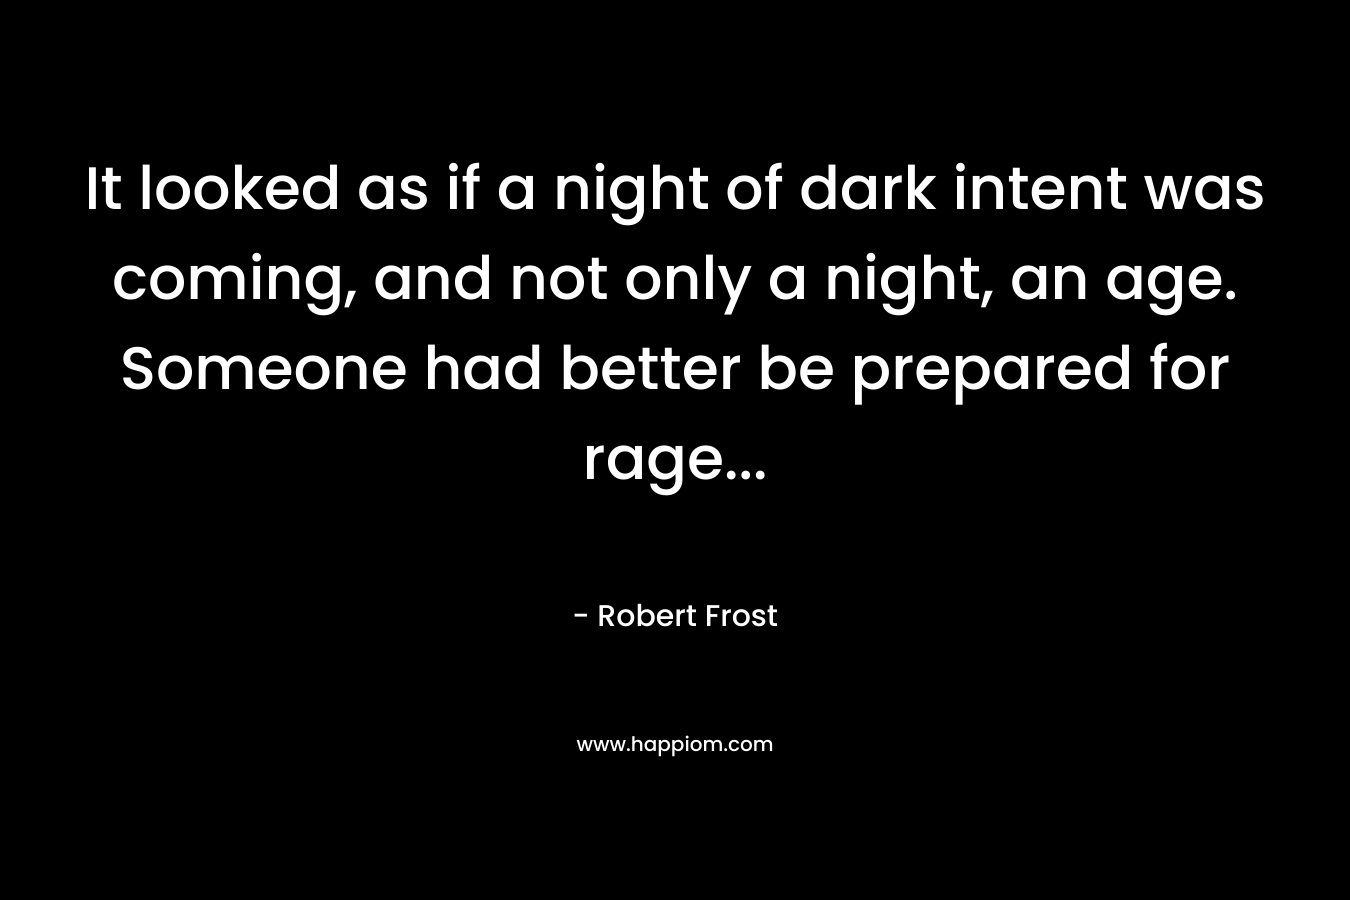 It looked as if a night of dark intent was coming, and not only a night, an age. Someone had better be prepared for rage… – Robert Frost